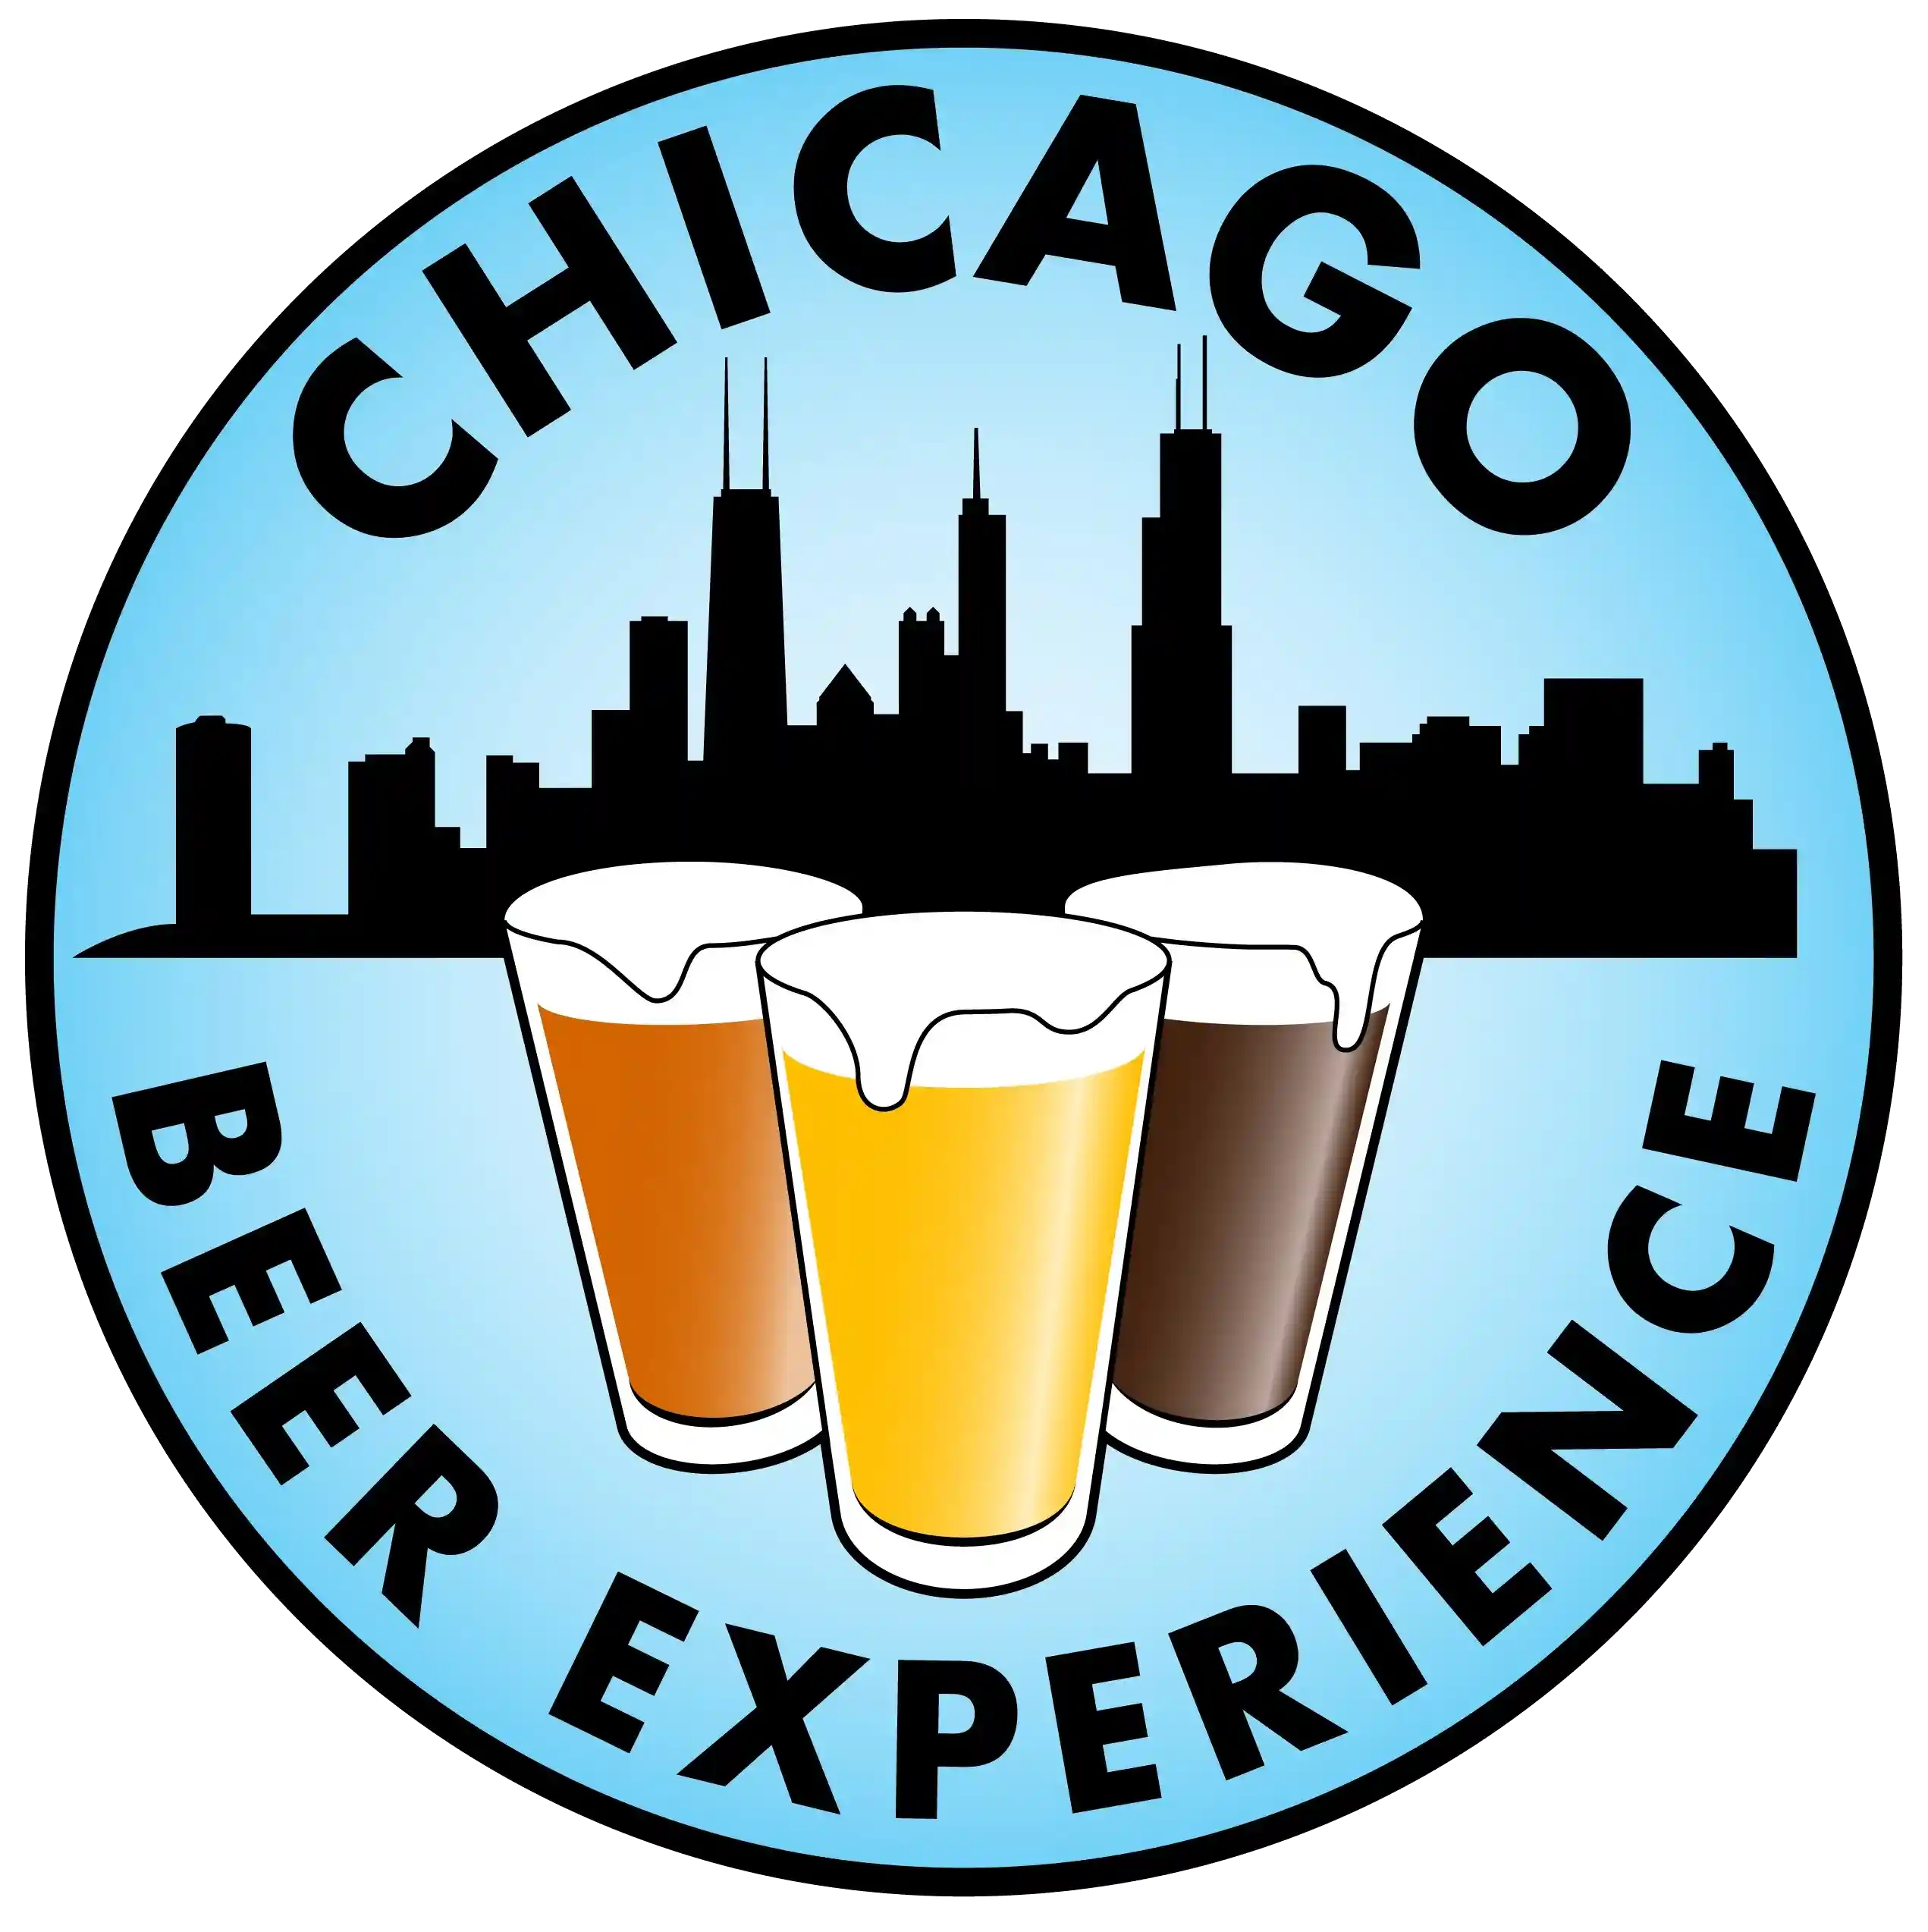 Chicago Beer Experience